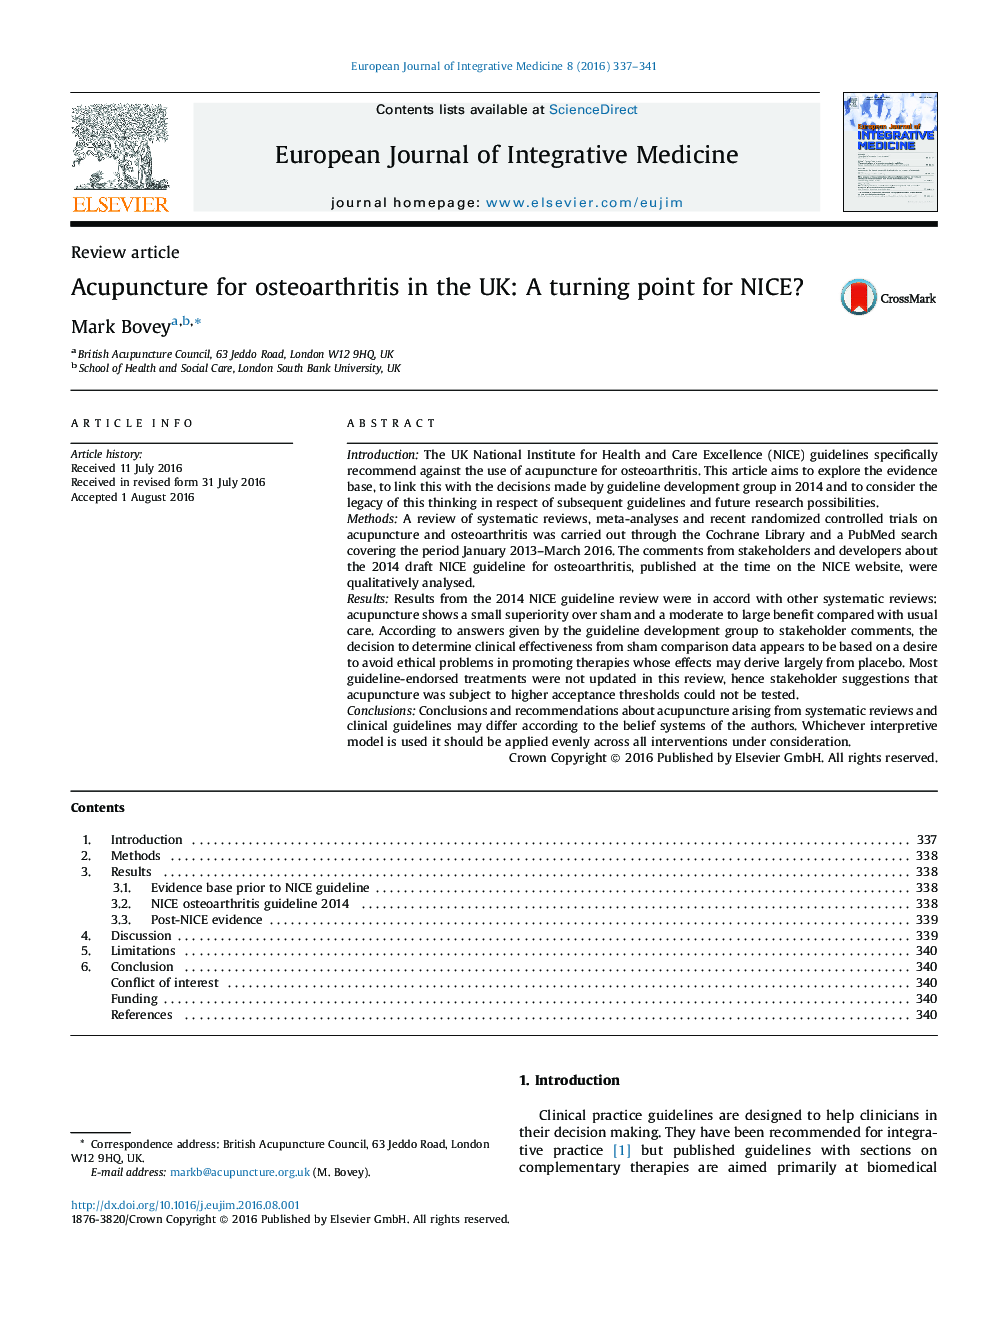 Acupuncture for osteoarthritis in the UK: A turning point for NICE?